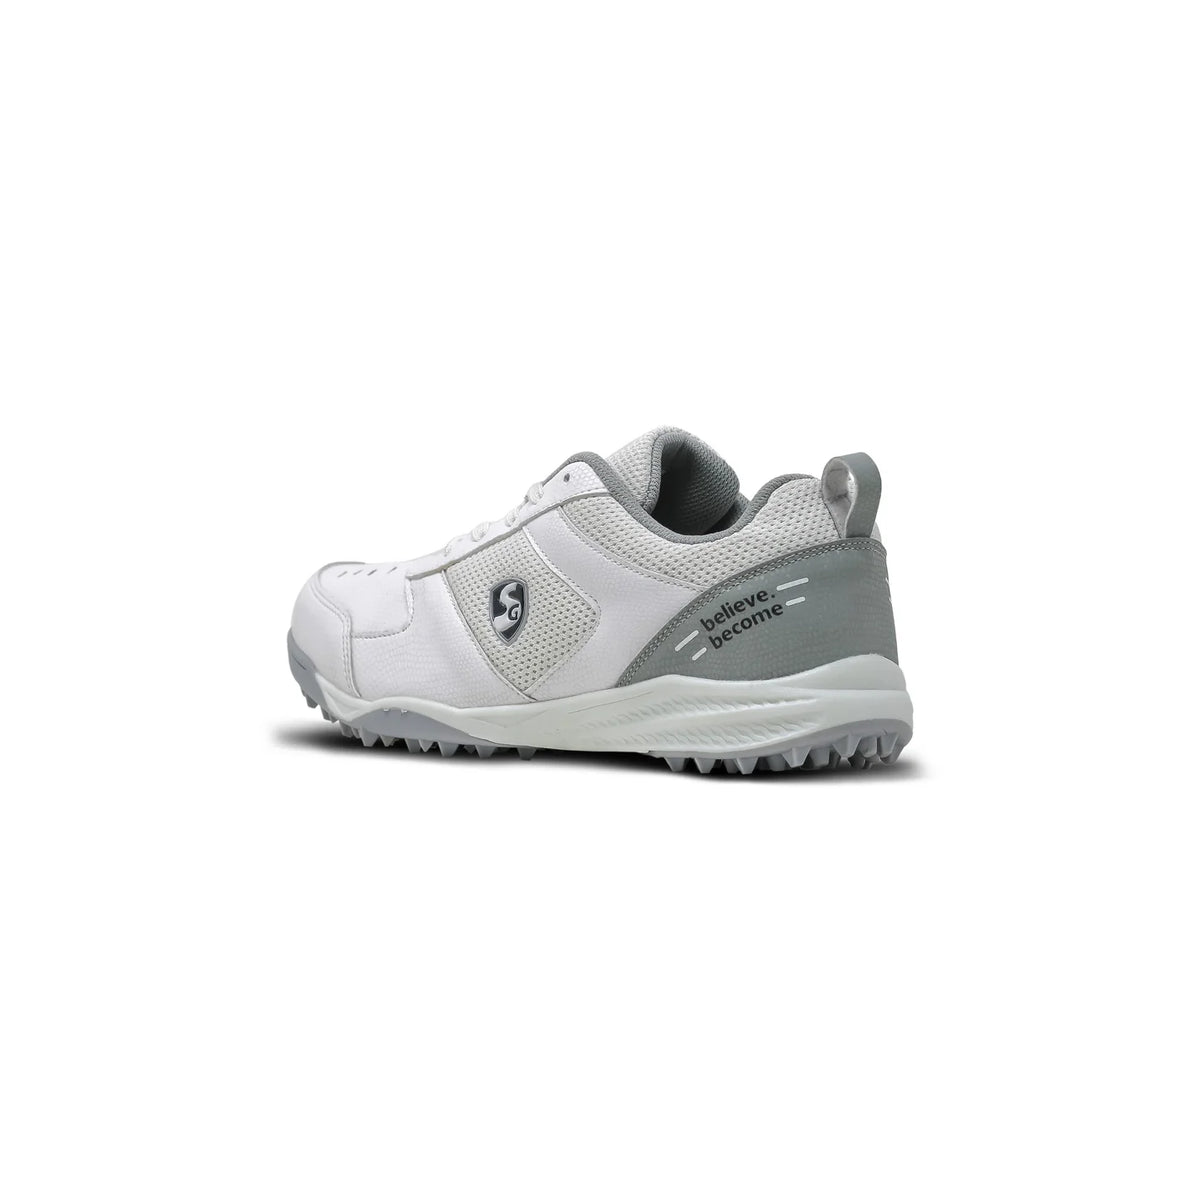 Pre-Order SG FUSION Lightweight and Durable Sports Shoes for Enhanced Performance - Grey/White